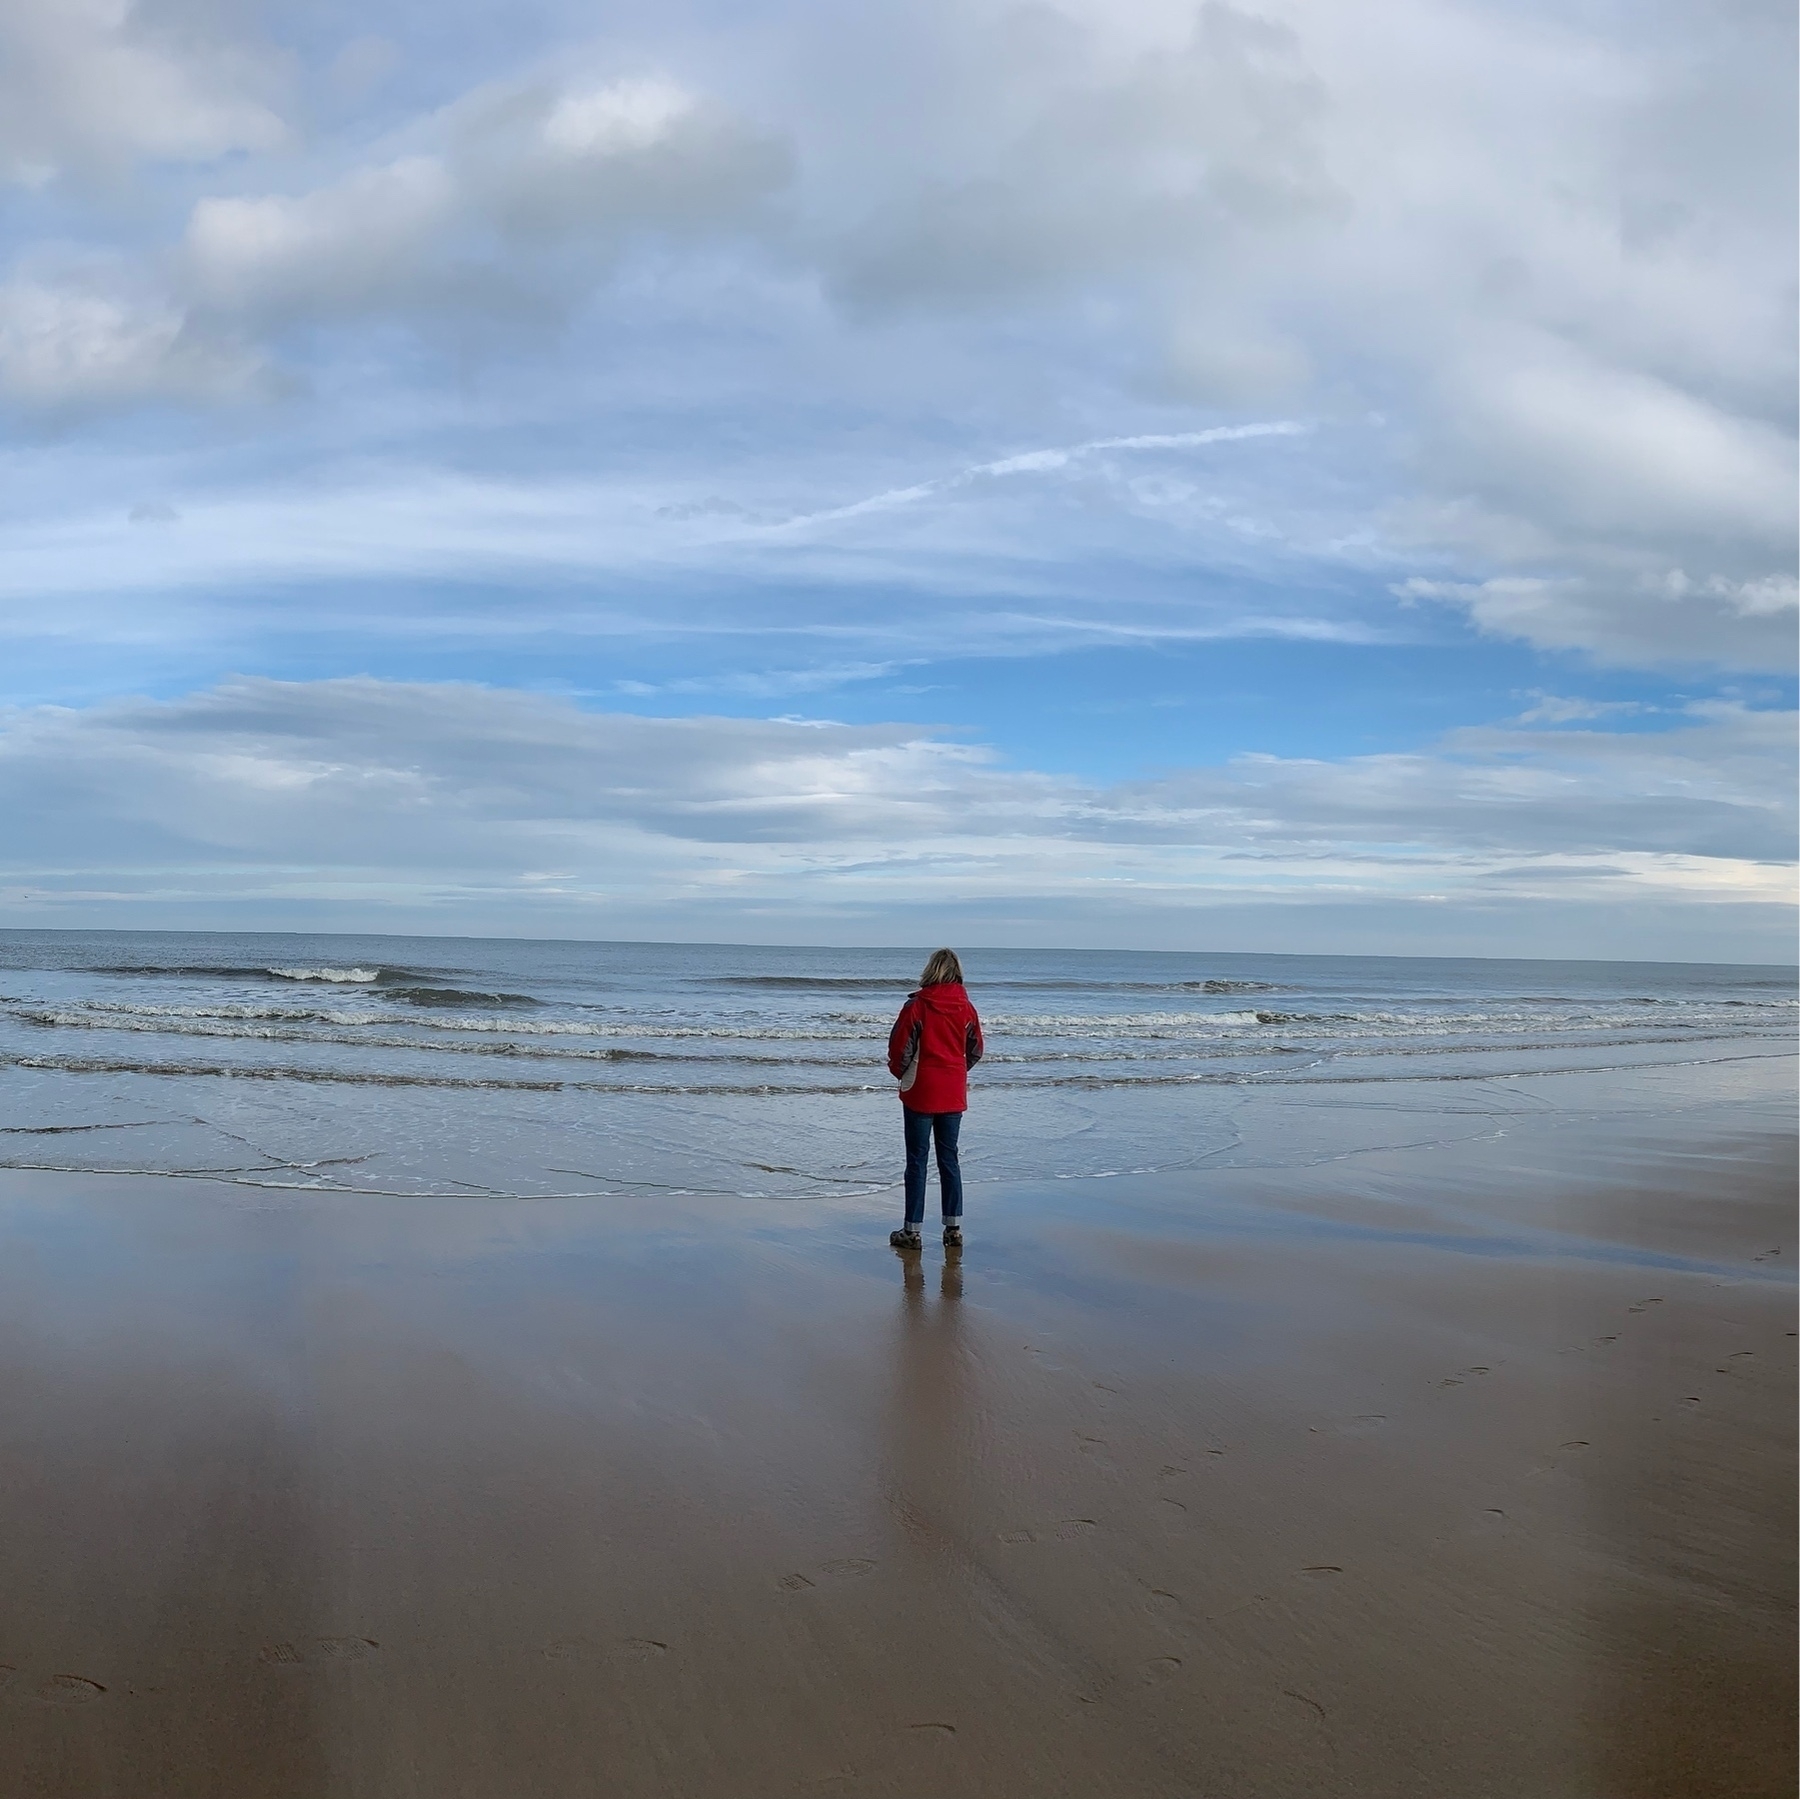 Woman in a red coat stands on the sand looking out to sea